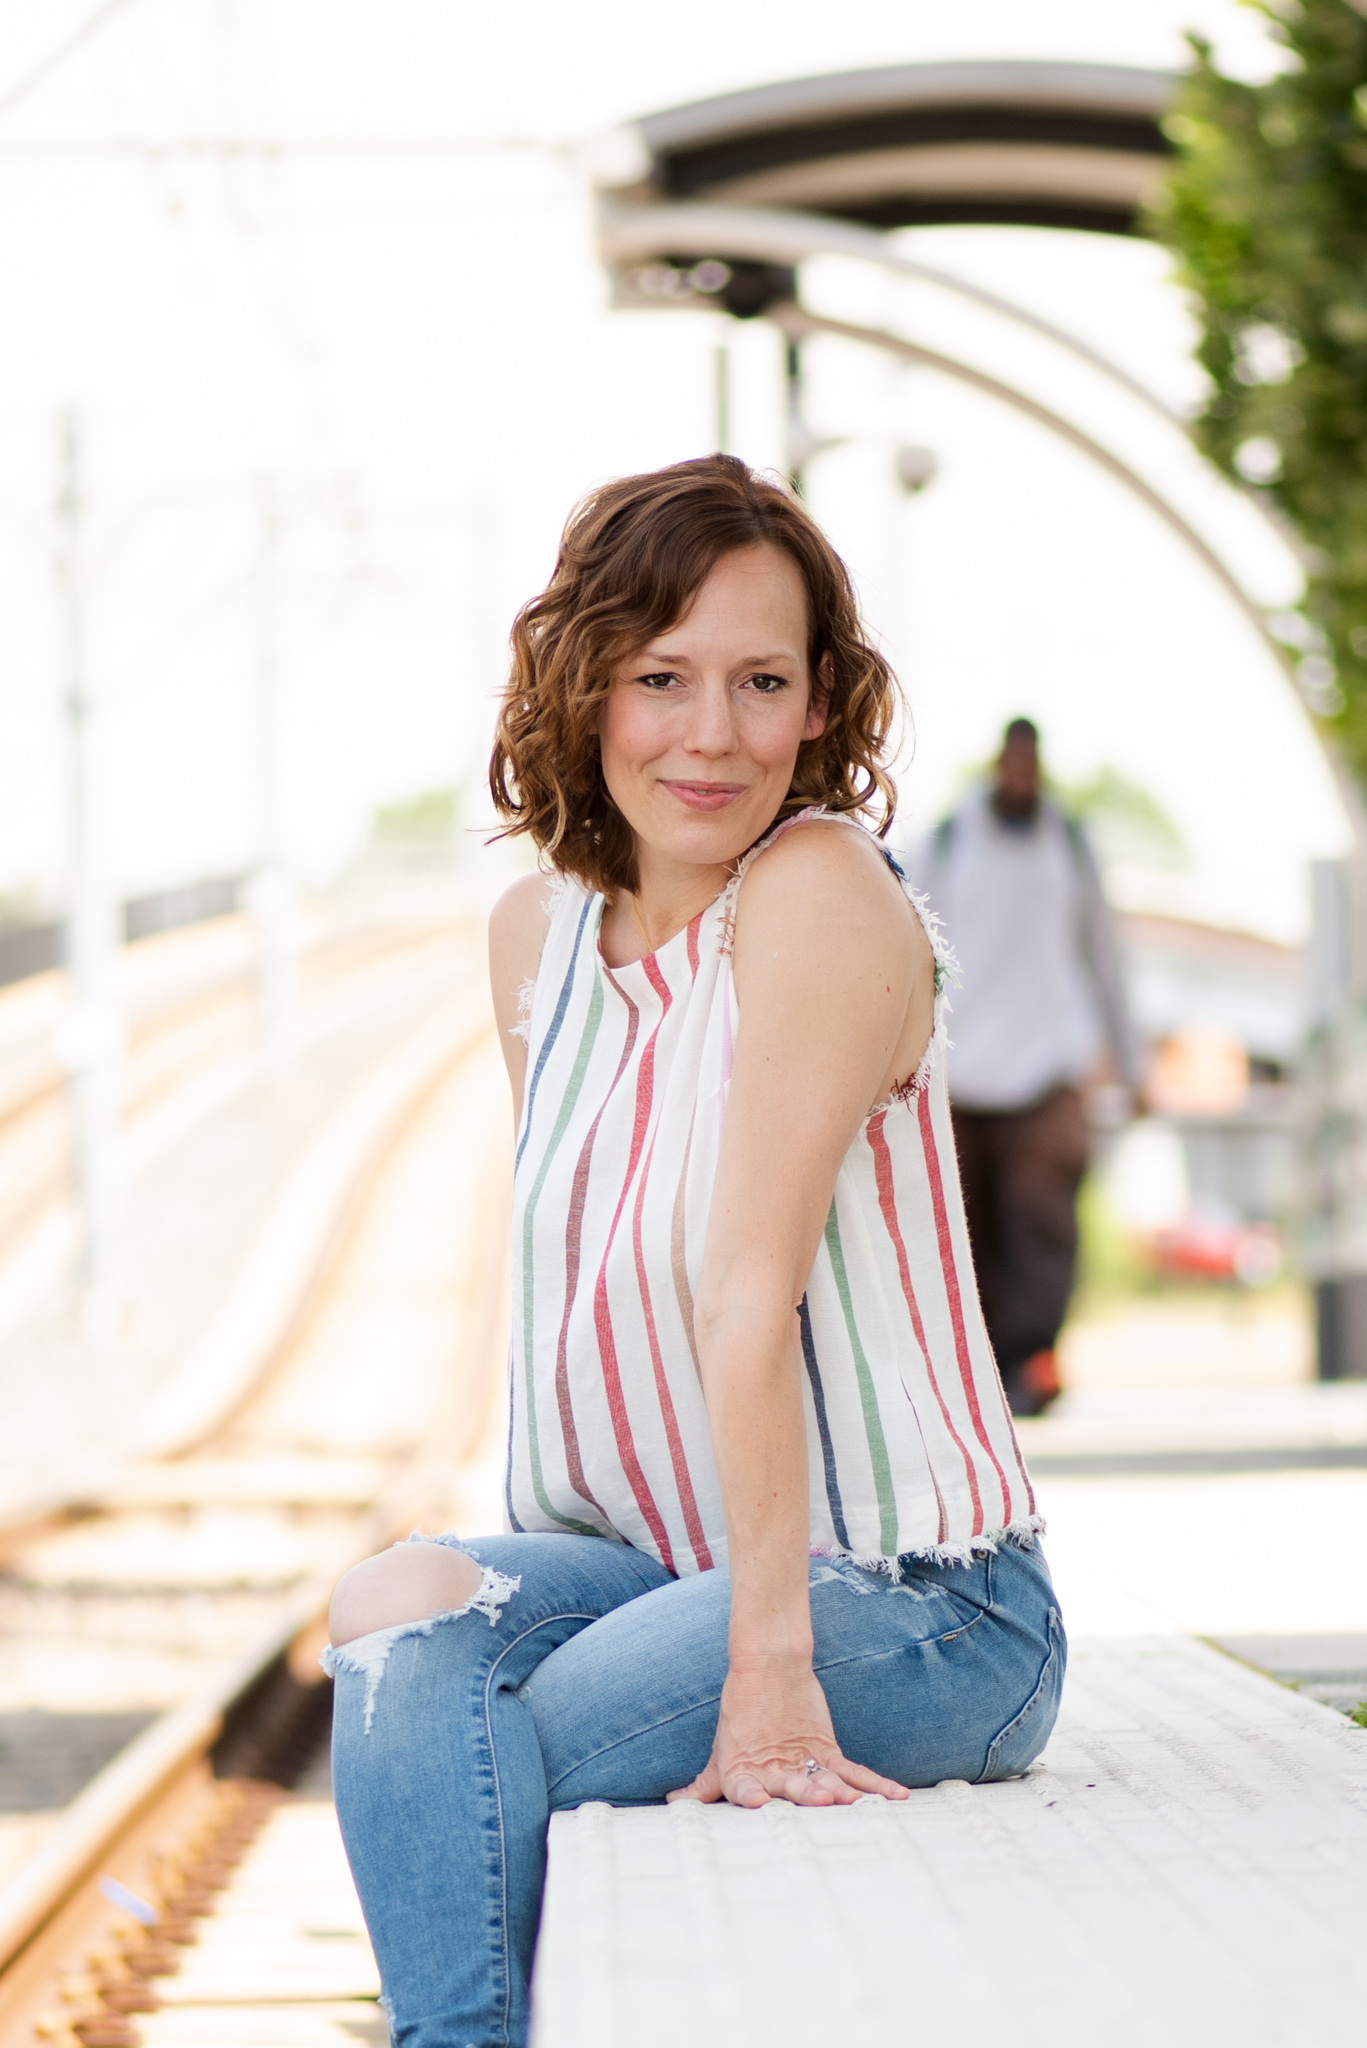 Woman poses for a picture at a light rail station.